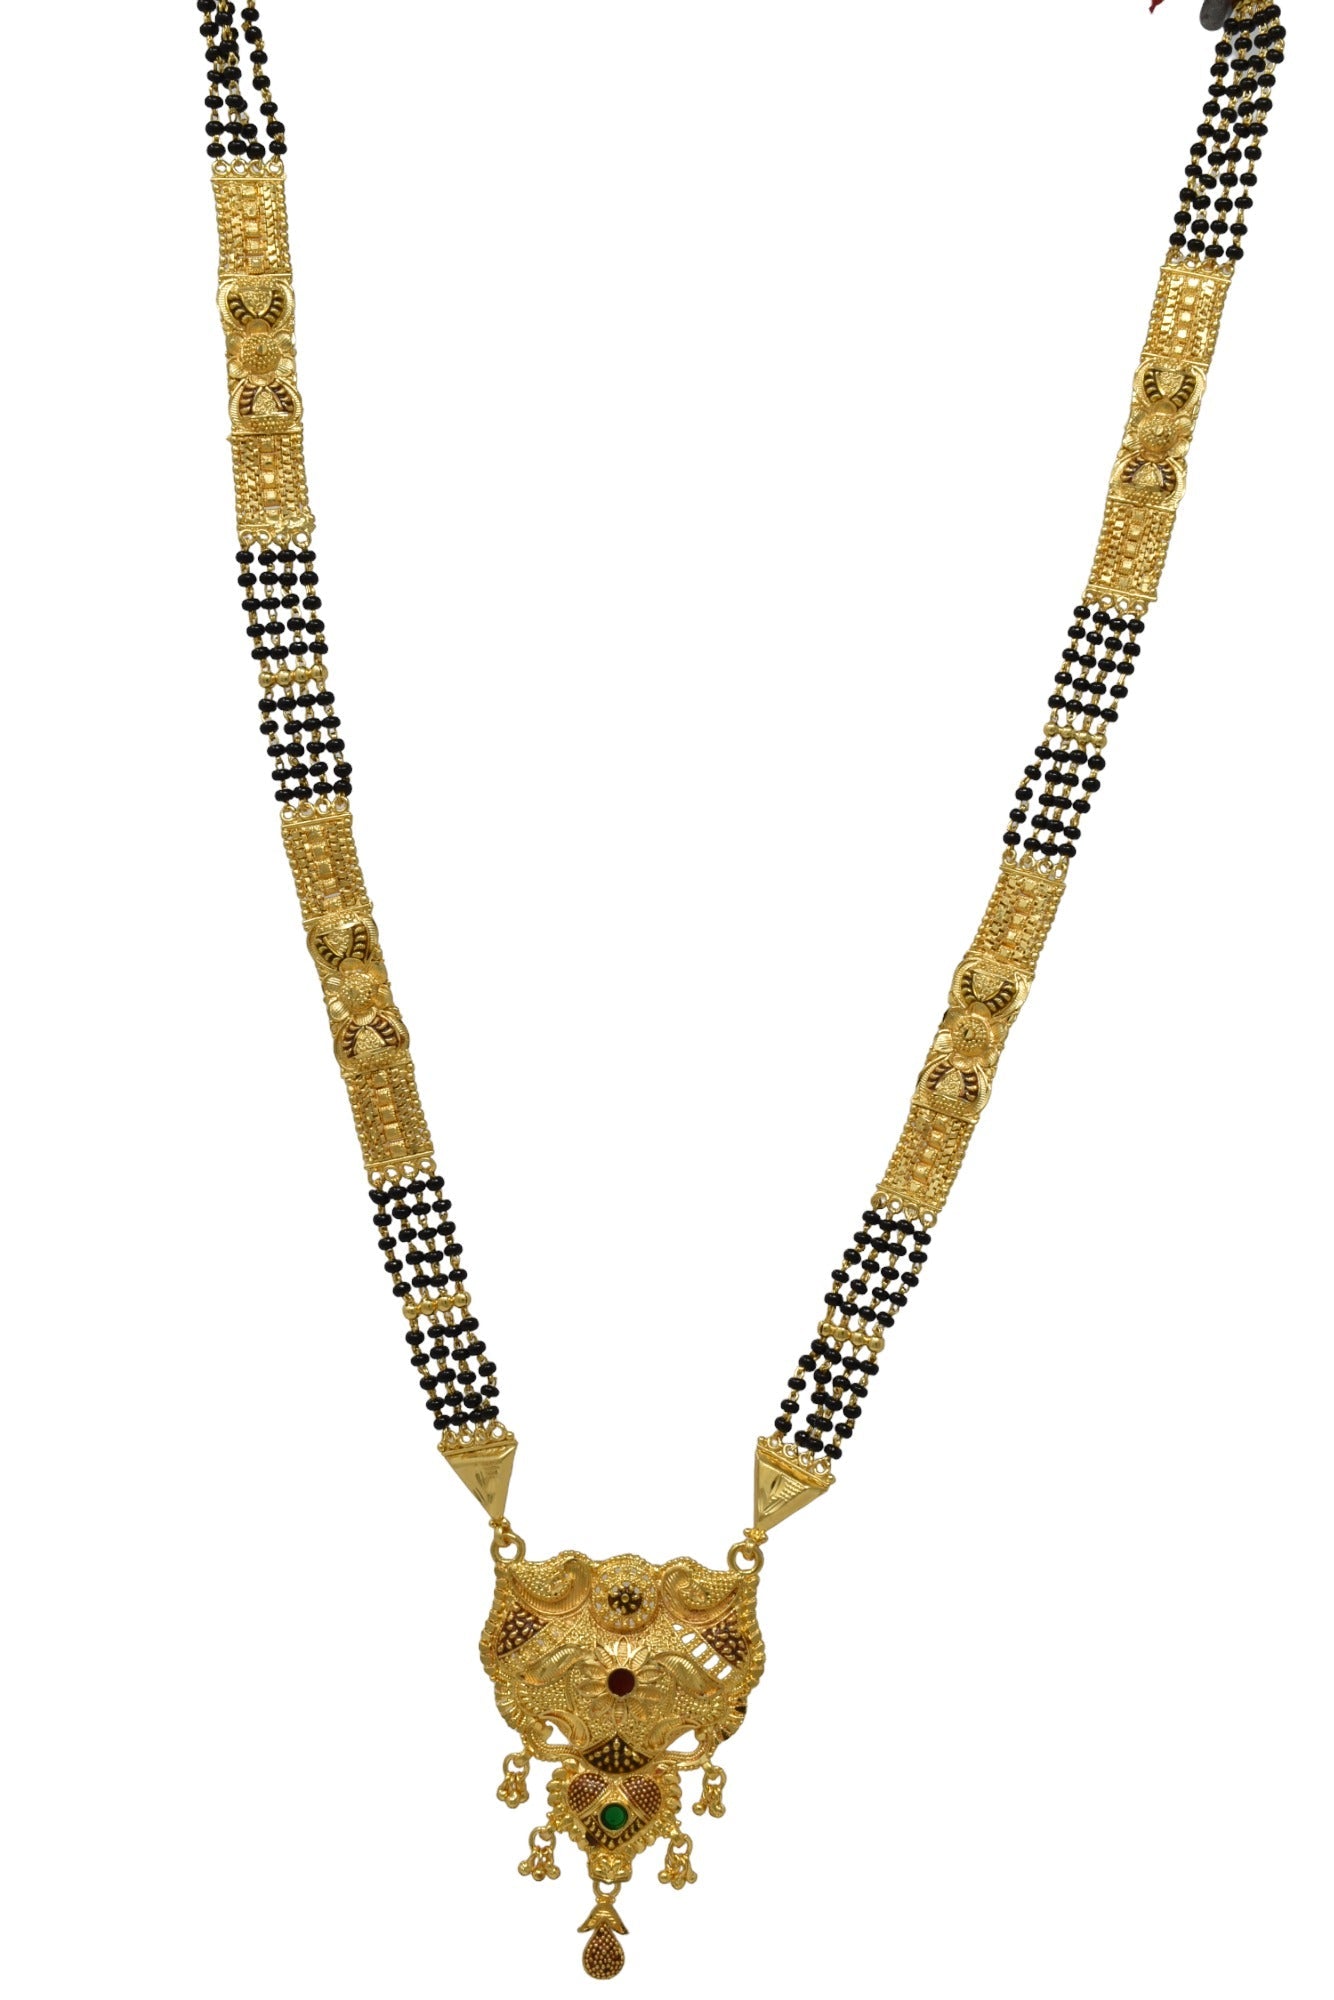 Golden and black beads chain with pendal